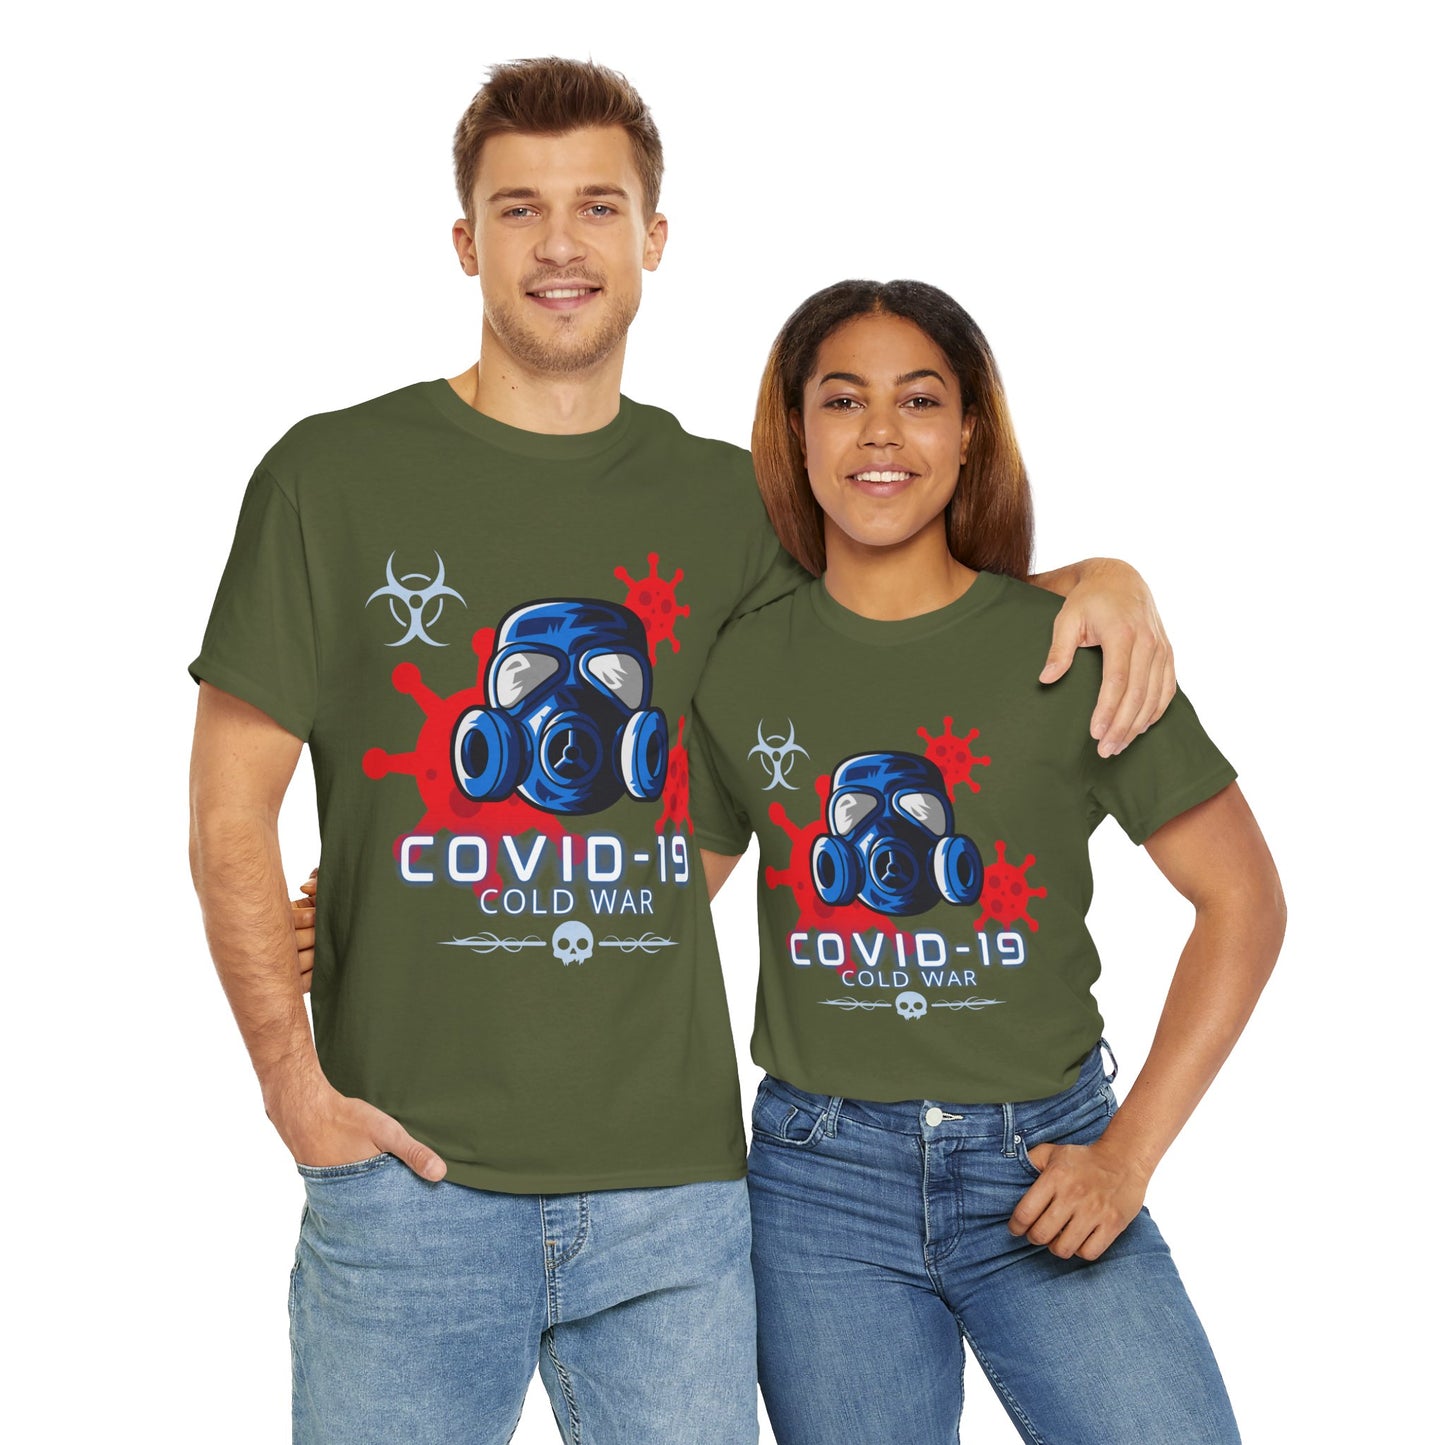 Covid-19 T-Shirt, Cold War Tee 100% Cotton, 5 Colours, AUS - USA - CAN warehouse, free post.